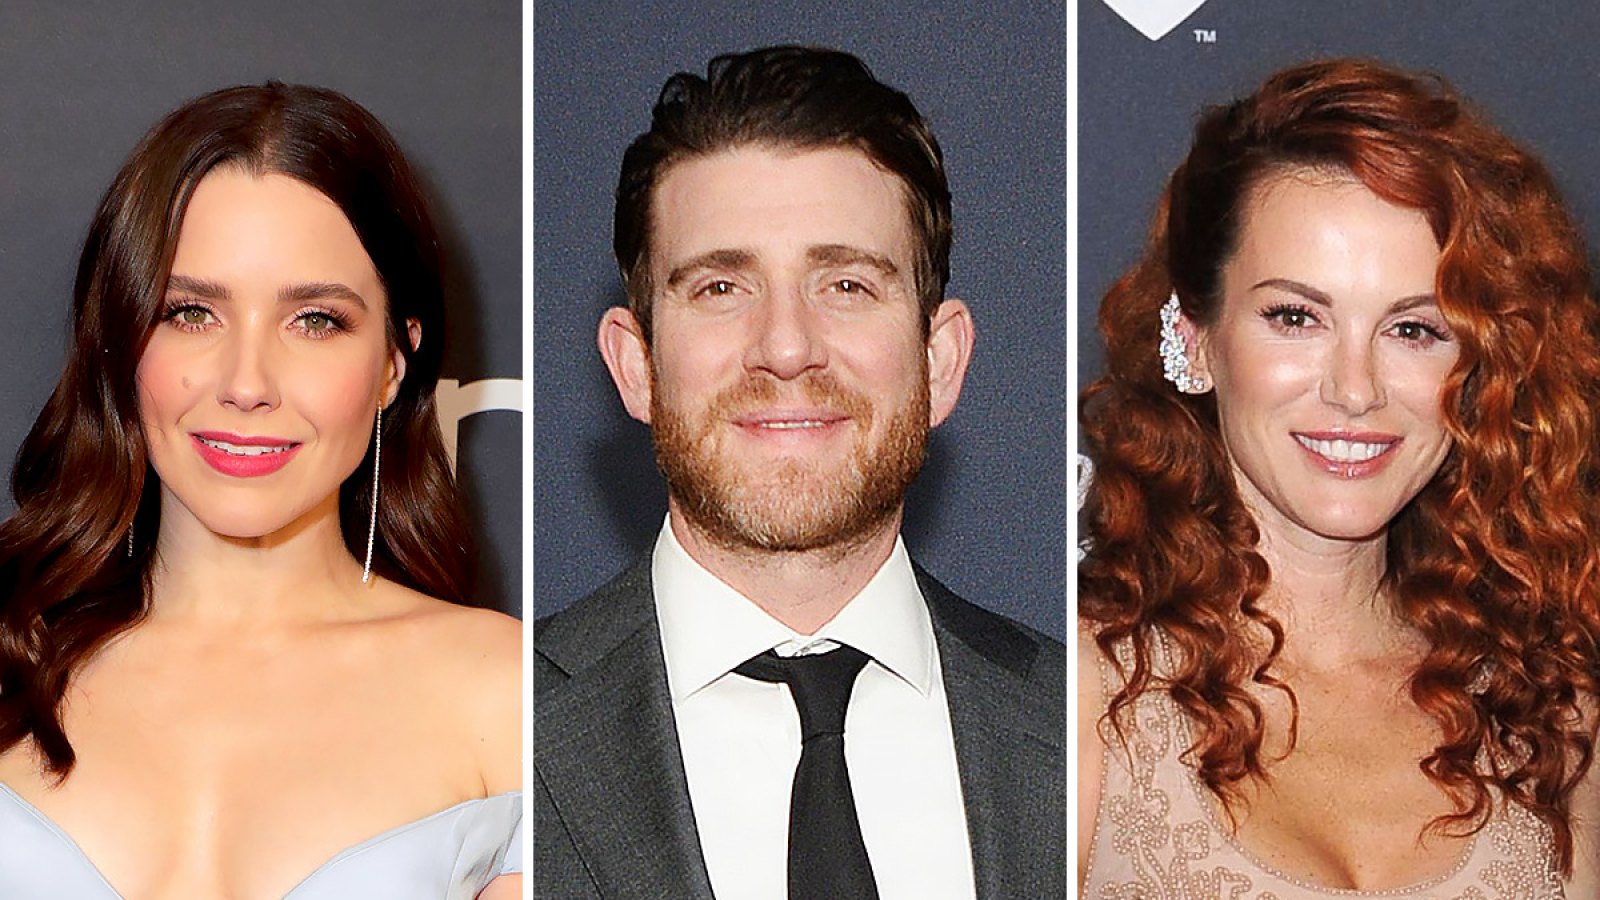 One Tree Hill Sophia Bush, Bryan Greenberg and Danneel Harris Reunite at Golden Globes 2020 Afterparty